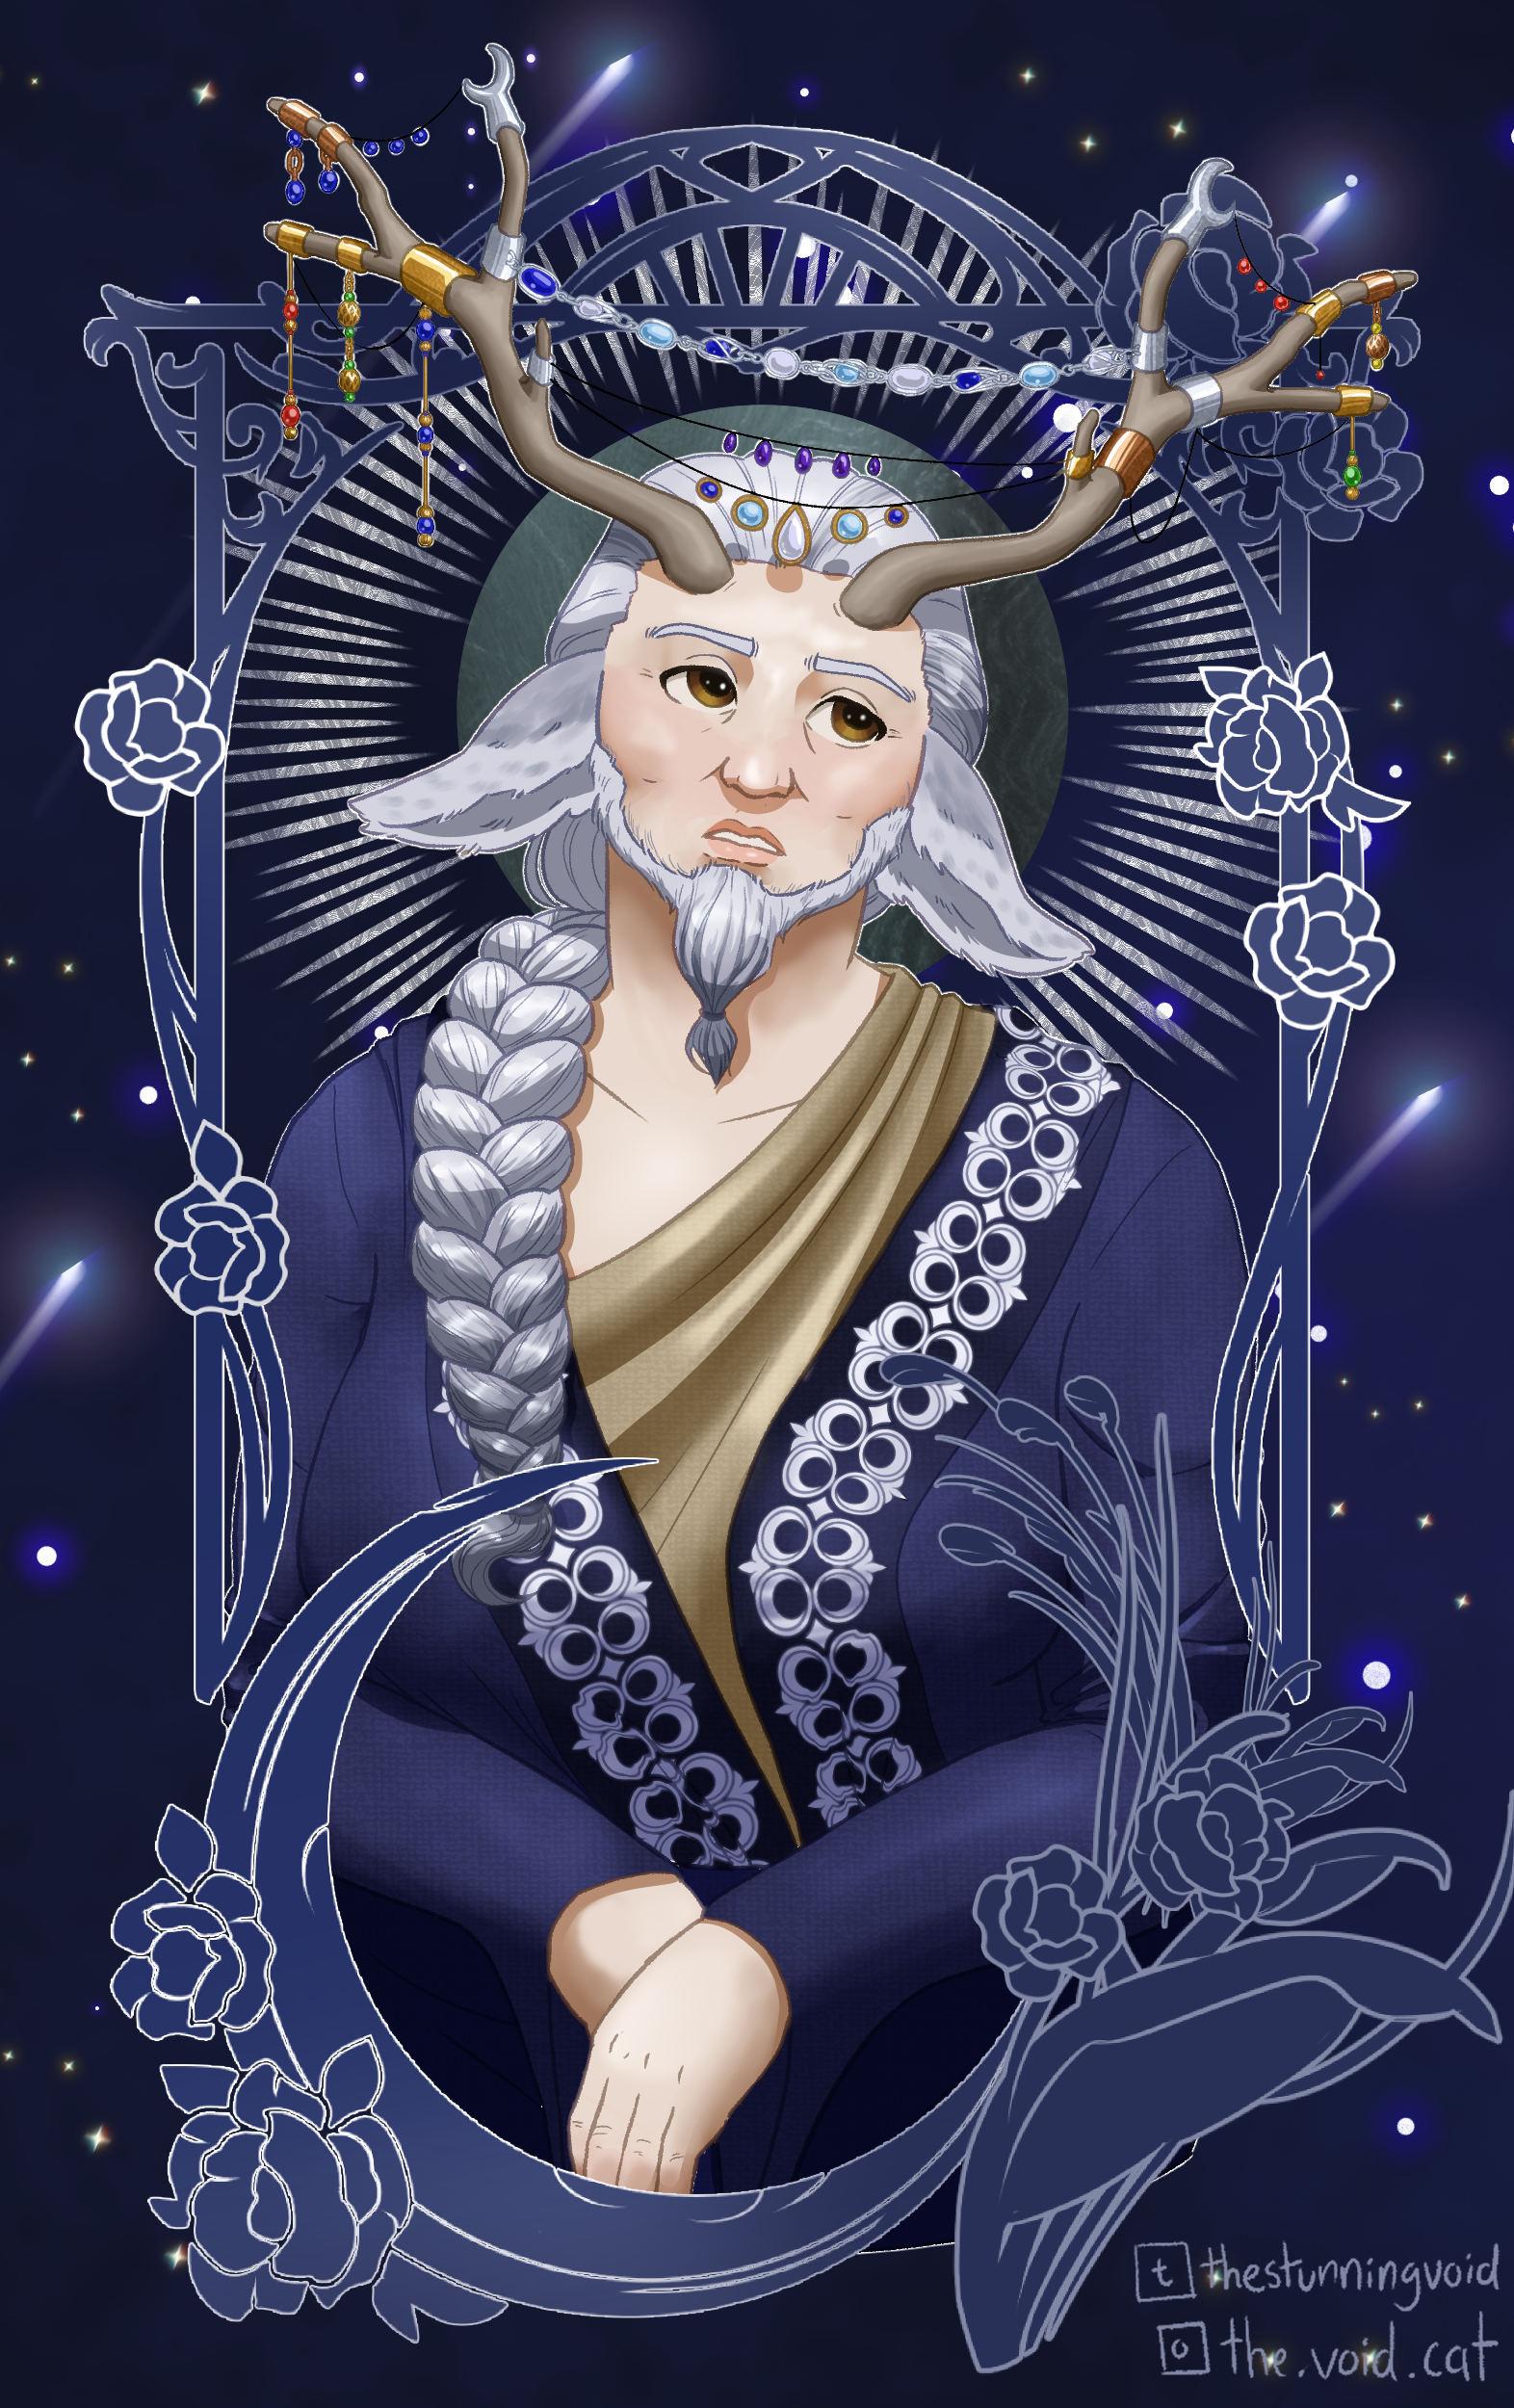 A waist up-drawing of Neoma, a satyr woman in loose-fitting, navy-blue robes. She has pale skin and long, light-gray hair which is tied into a single braid that falls over her shoulder. She also has a beard which is short around her jaw but long at her chin, where it's tied into a bulb shape. Her ears are deer-like and the same gray as her hair, and she has antlers growing from her forehead that are decorated with gemstones and chains. Her hands are folded over her stomach and she looks to the sky, saintly. A decorative frame with moon and flower motifs boxes her in.